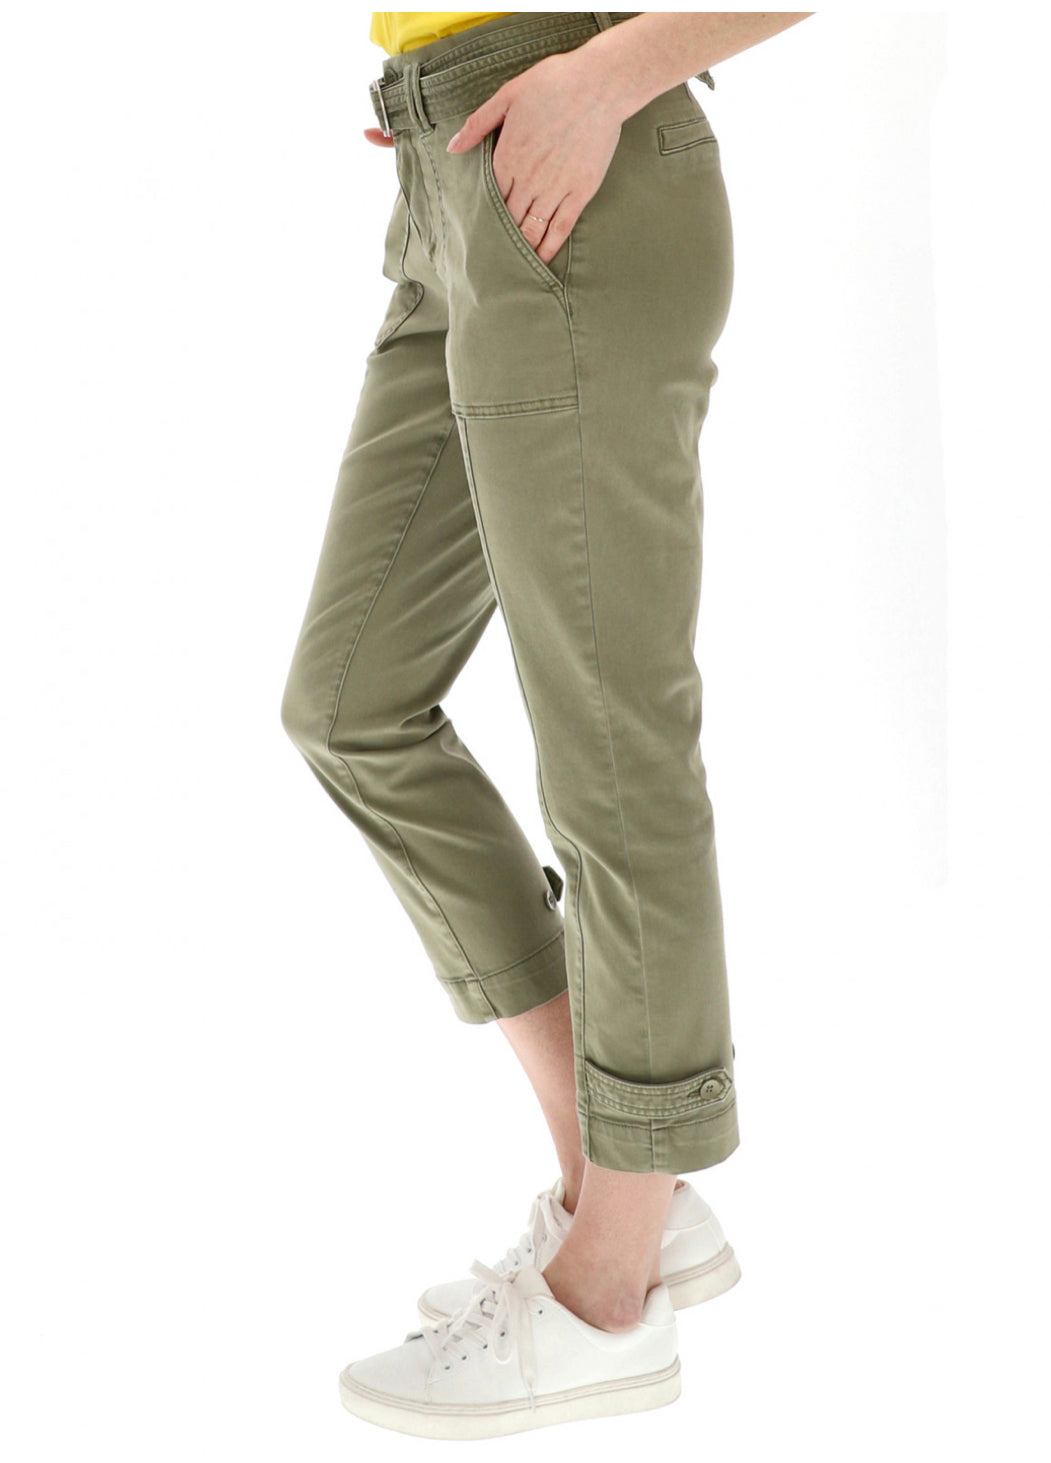 Red Button, Debby Color 2893, Khaki